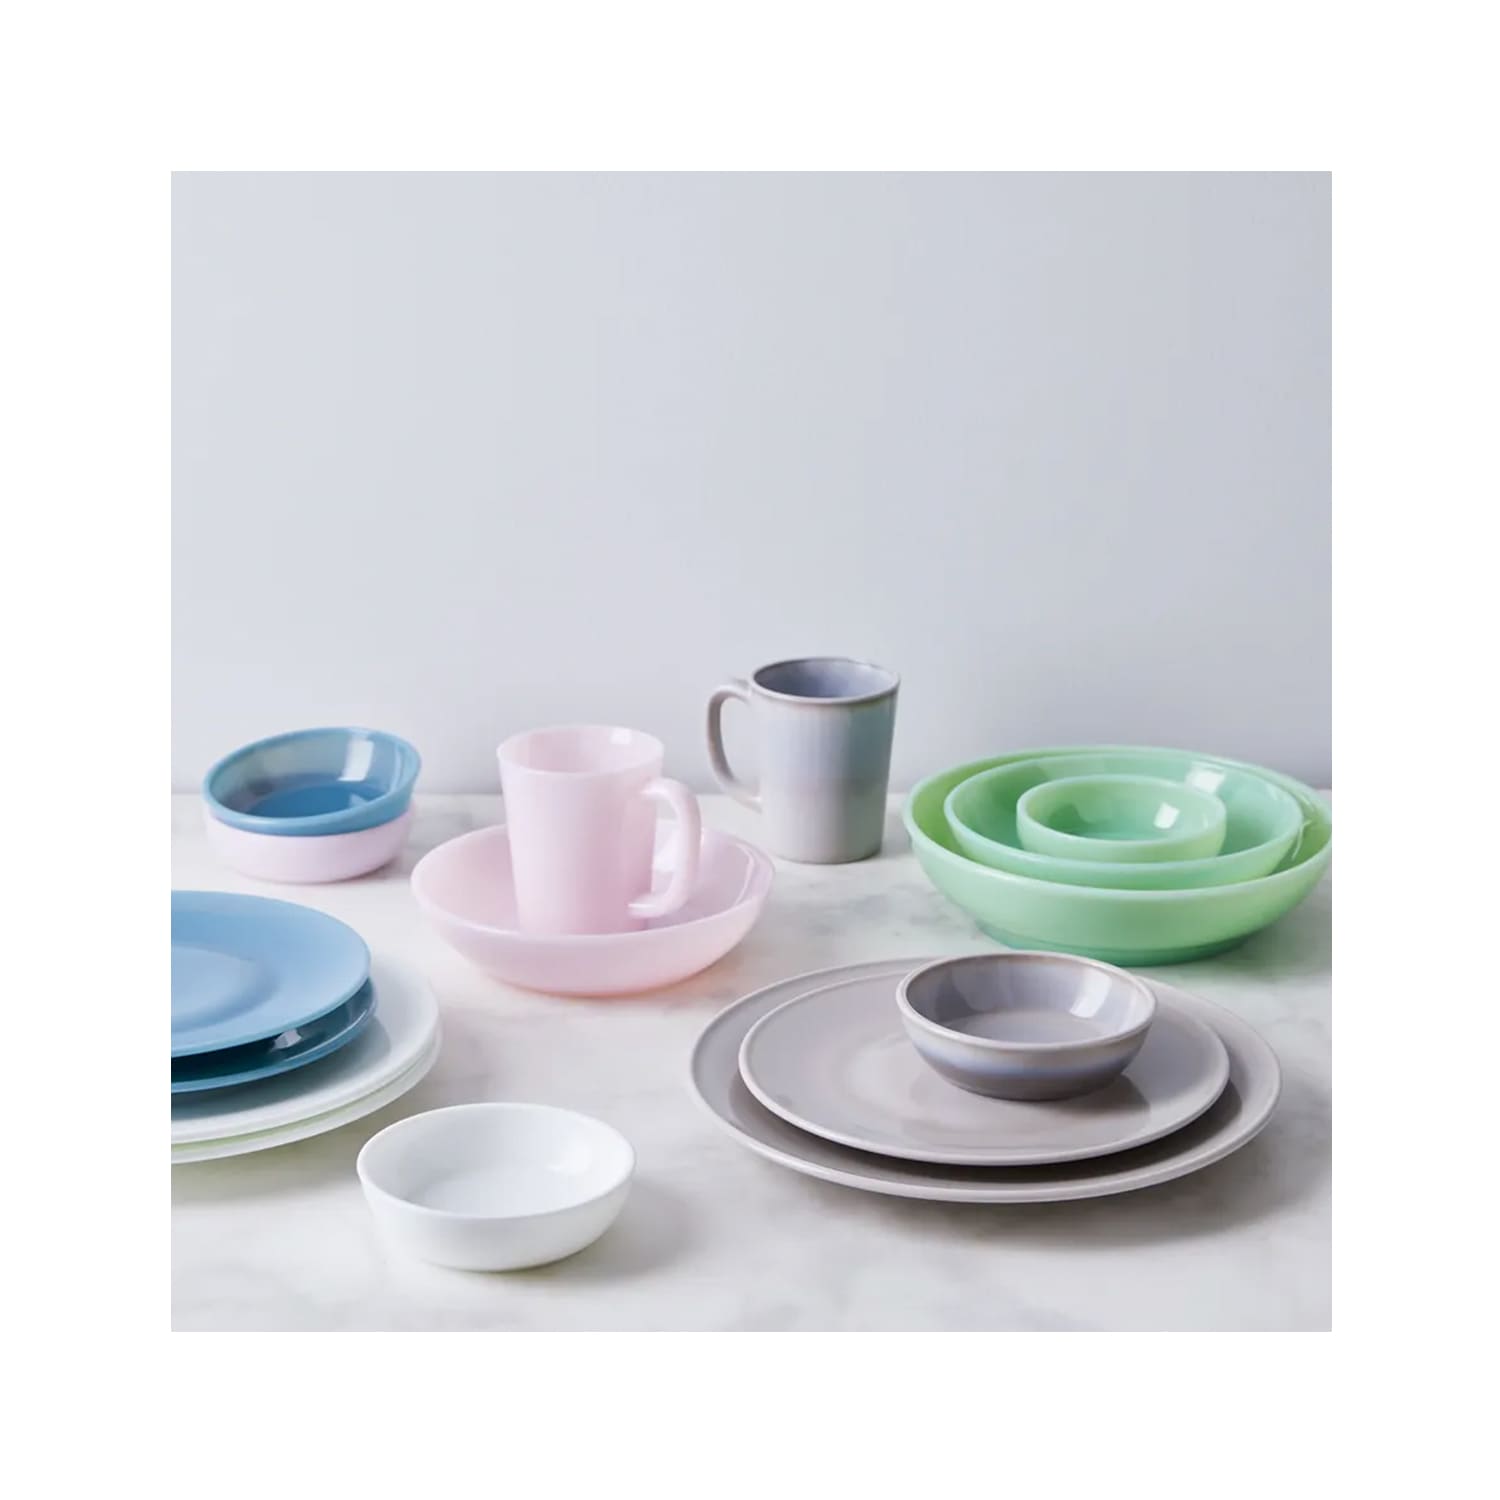 http://cdn.apartmenttherapy.info/image/upload/v1684604118/at/product%20listing/food-52-mosser-colored-glass-dinnerware.jpg